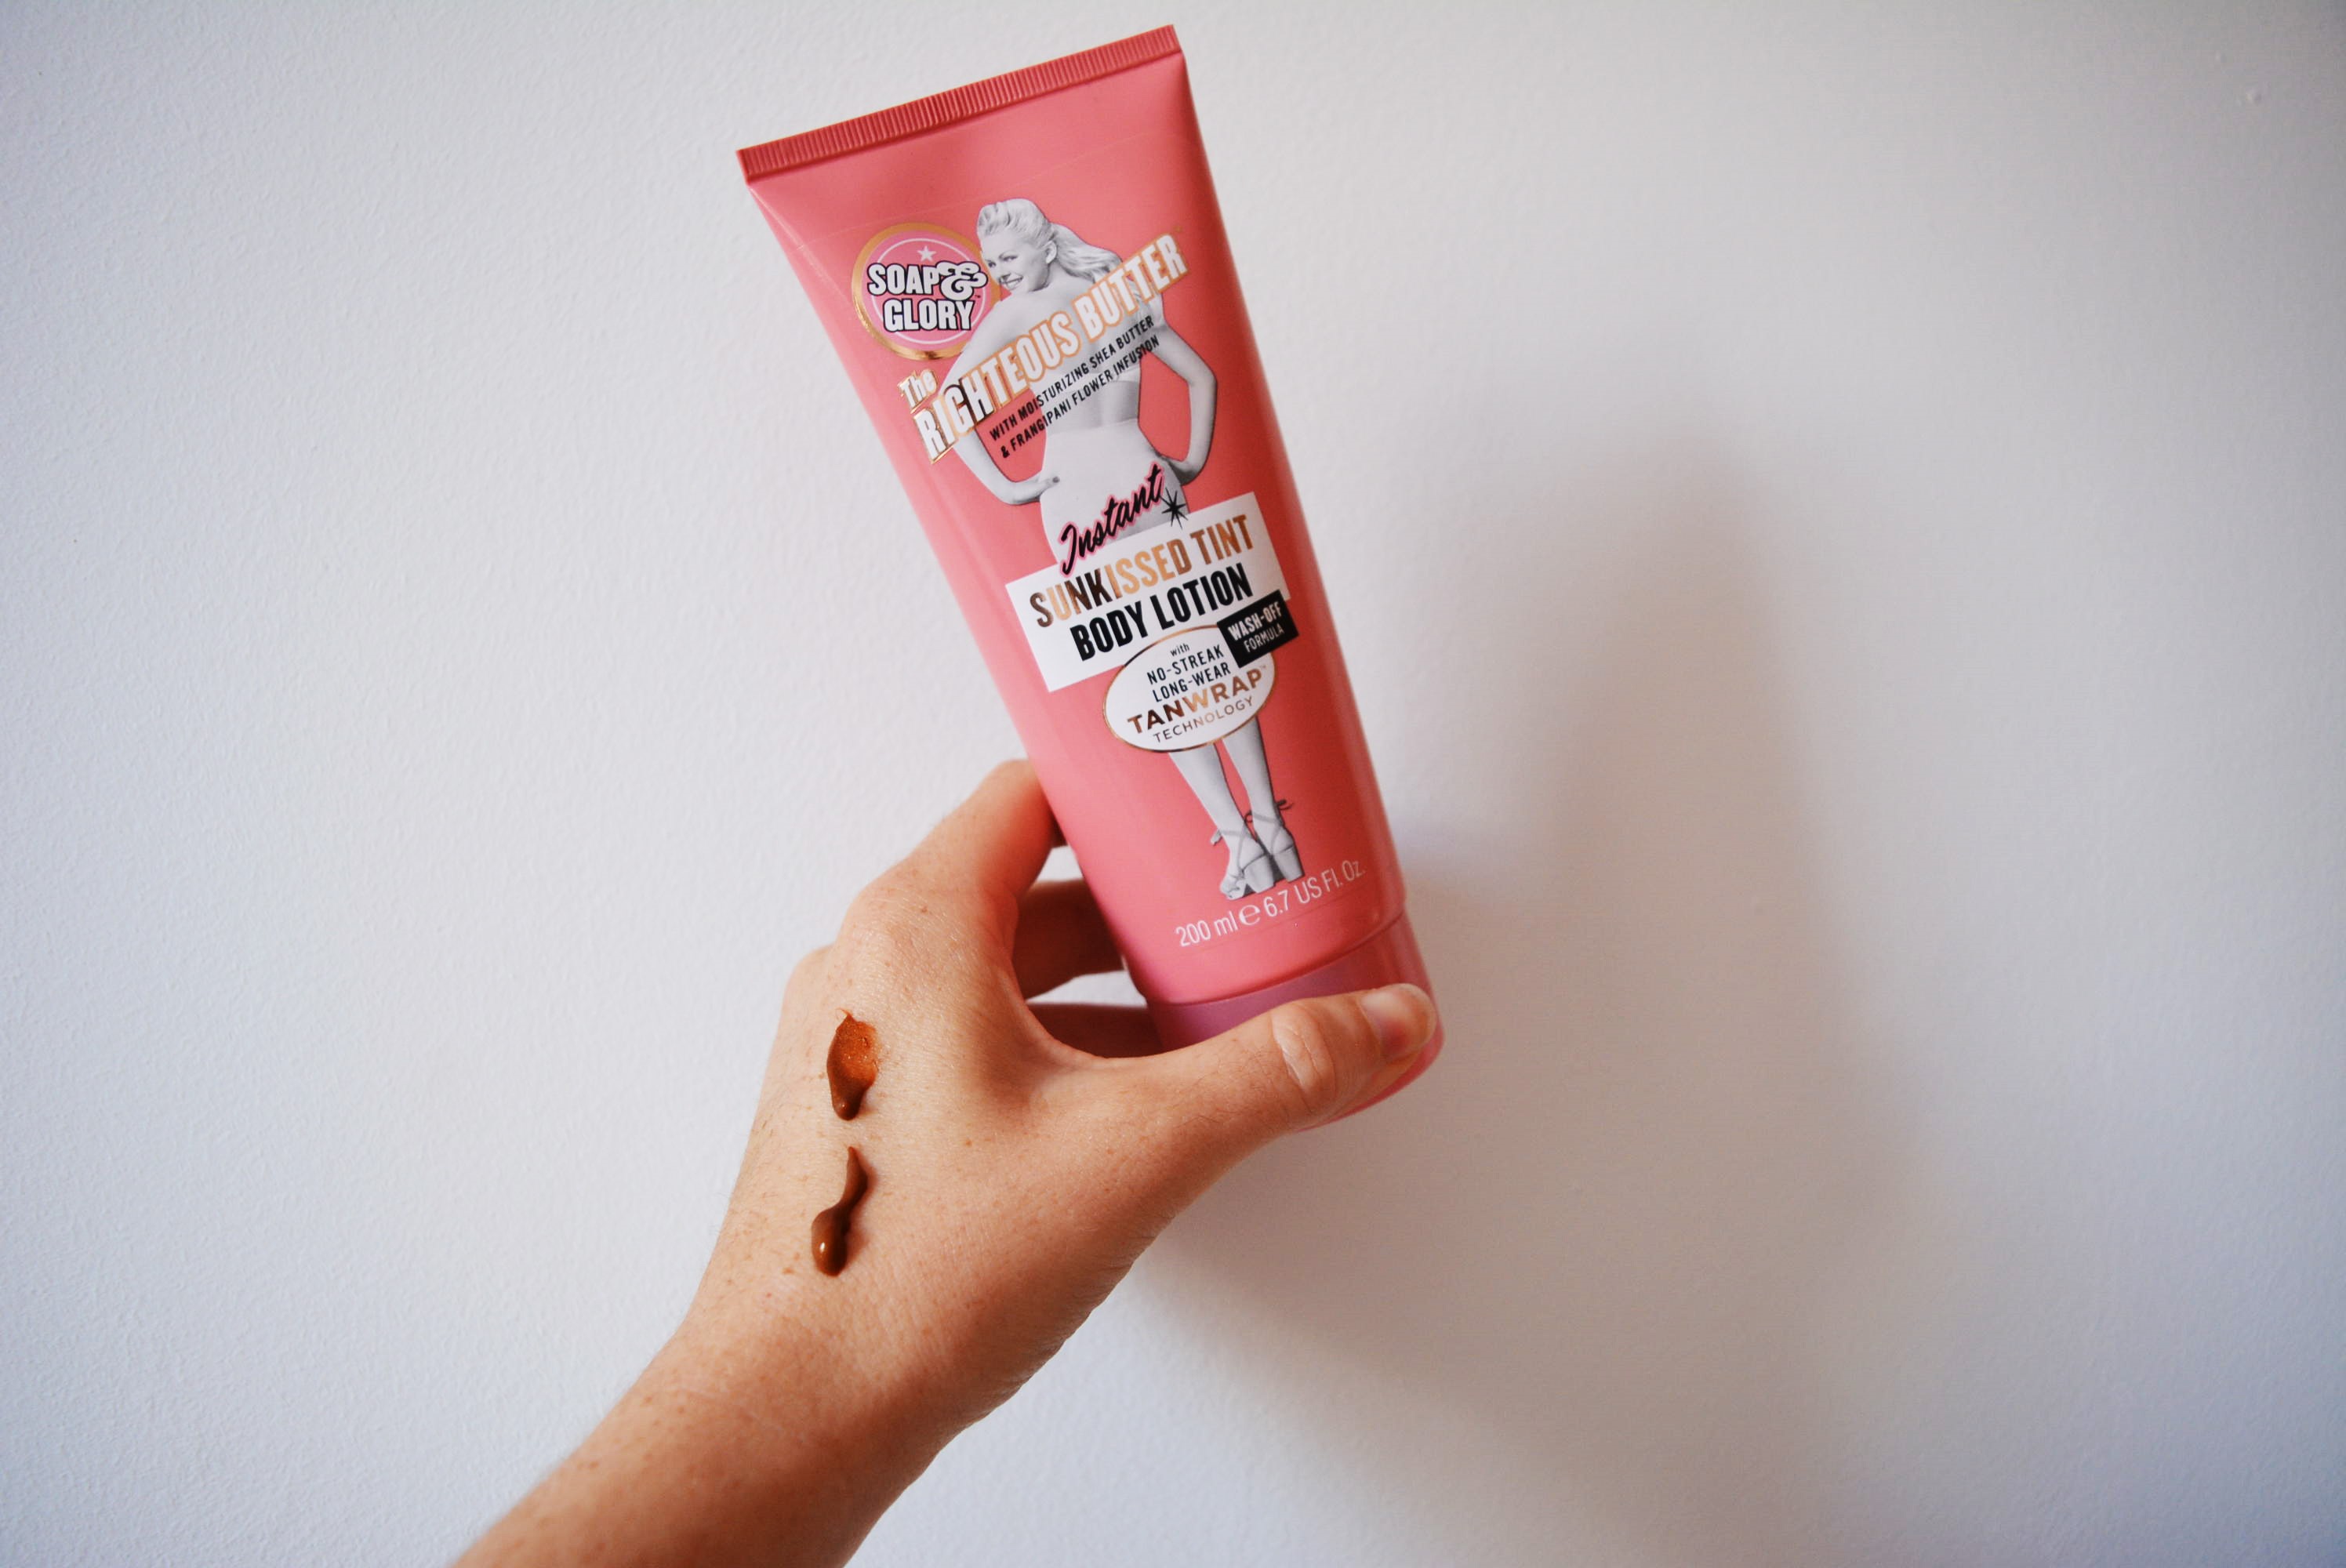 sunkissed tint soap and glory